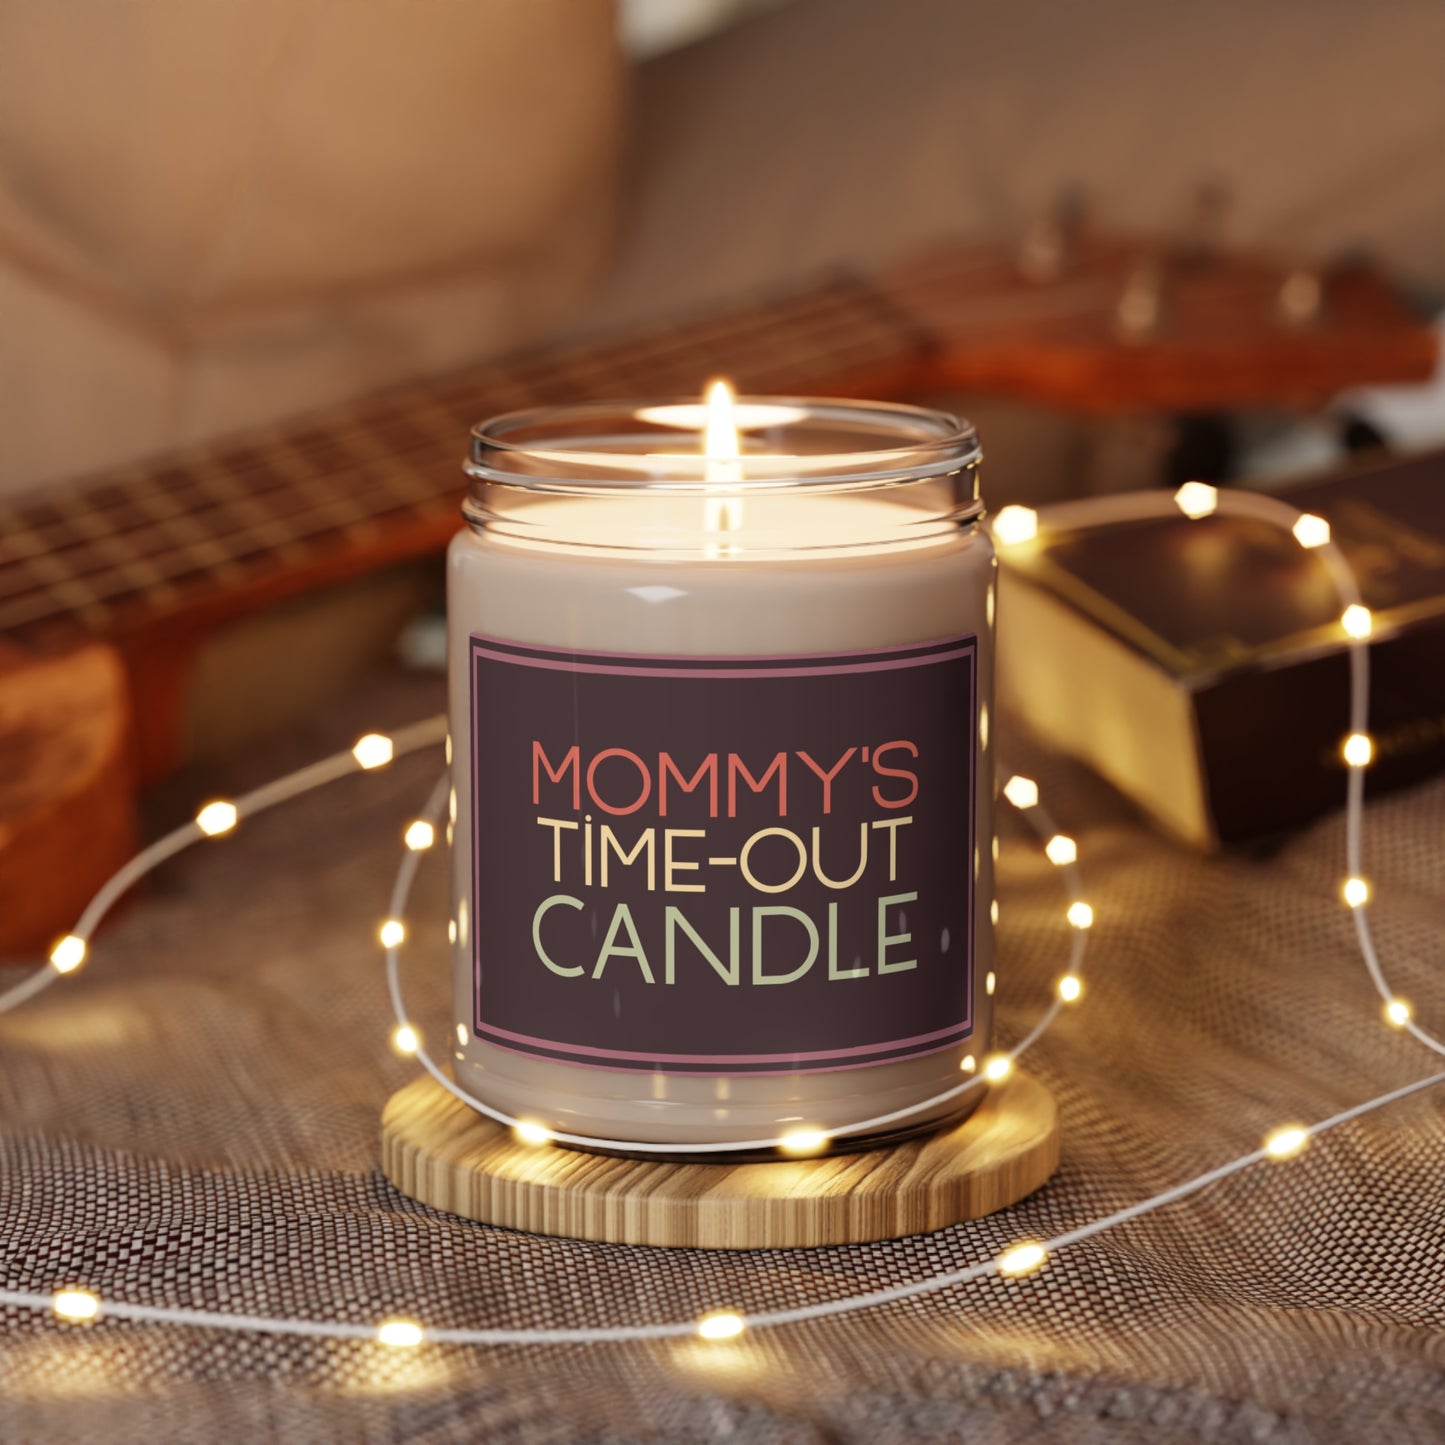 "Mommy's Time Out Candle" Scented Soy Candle, 9oz